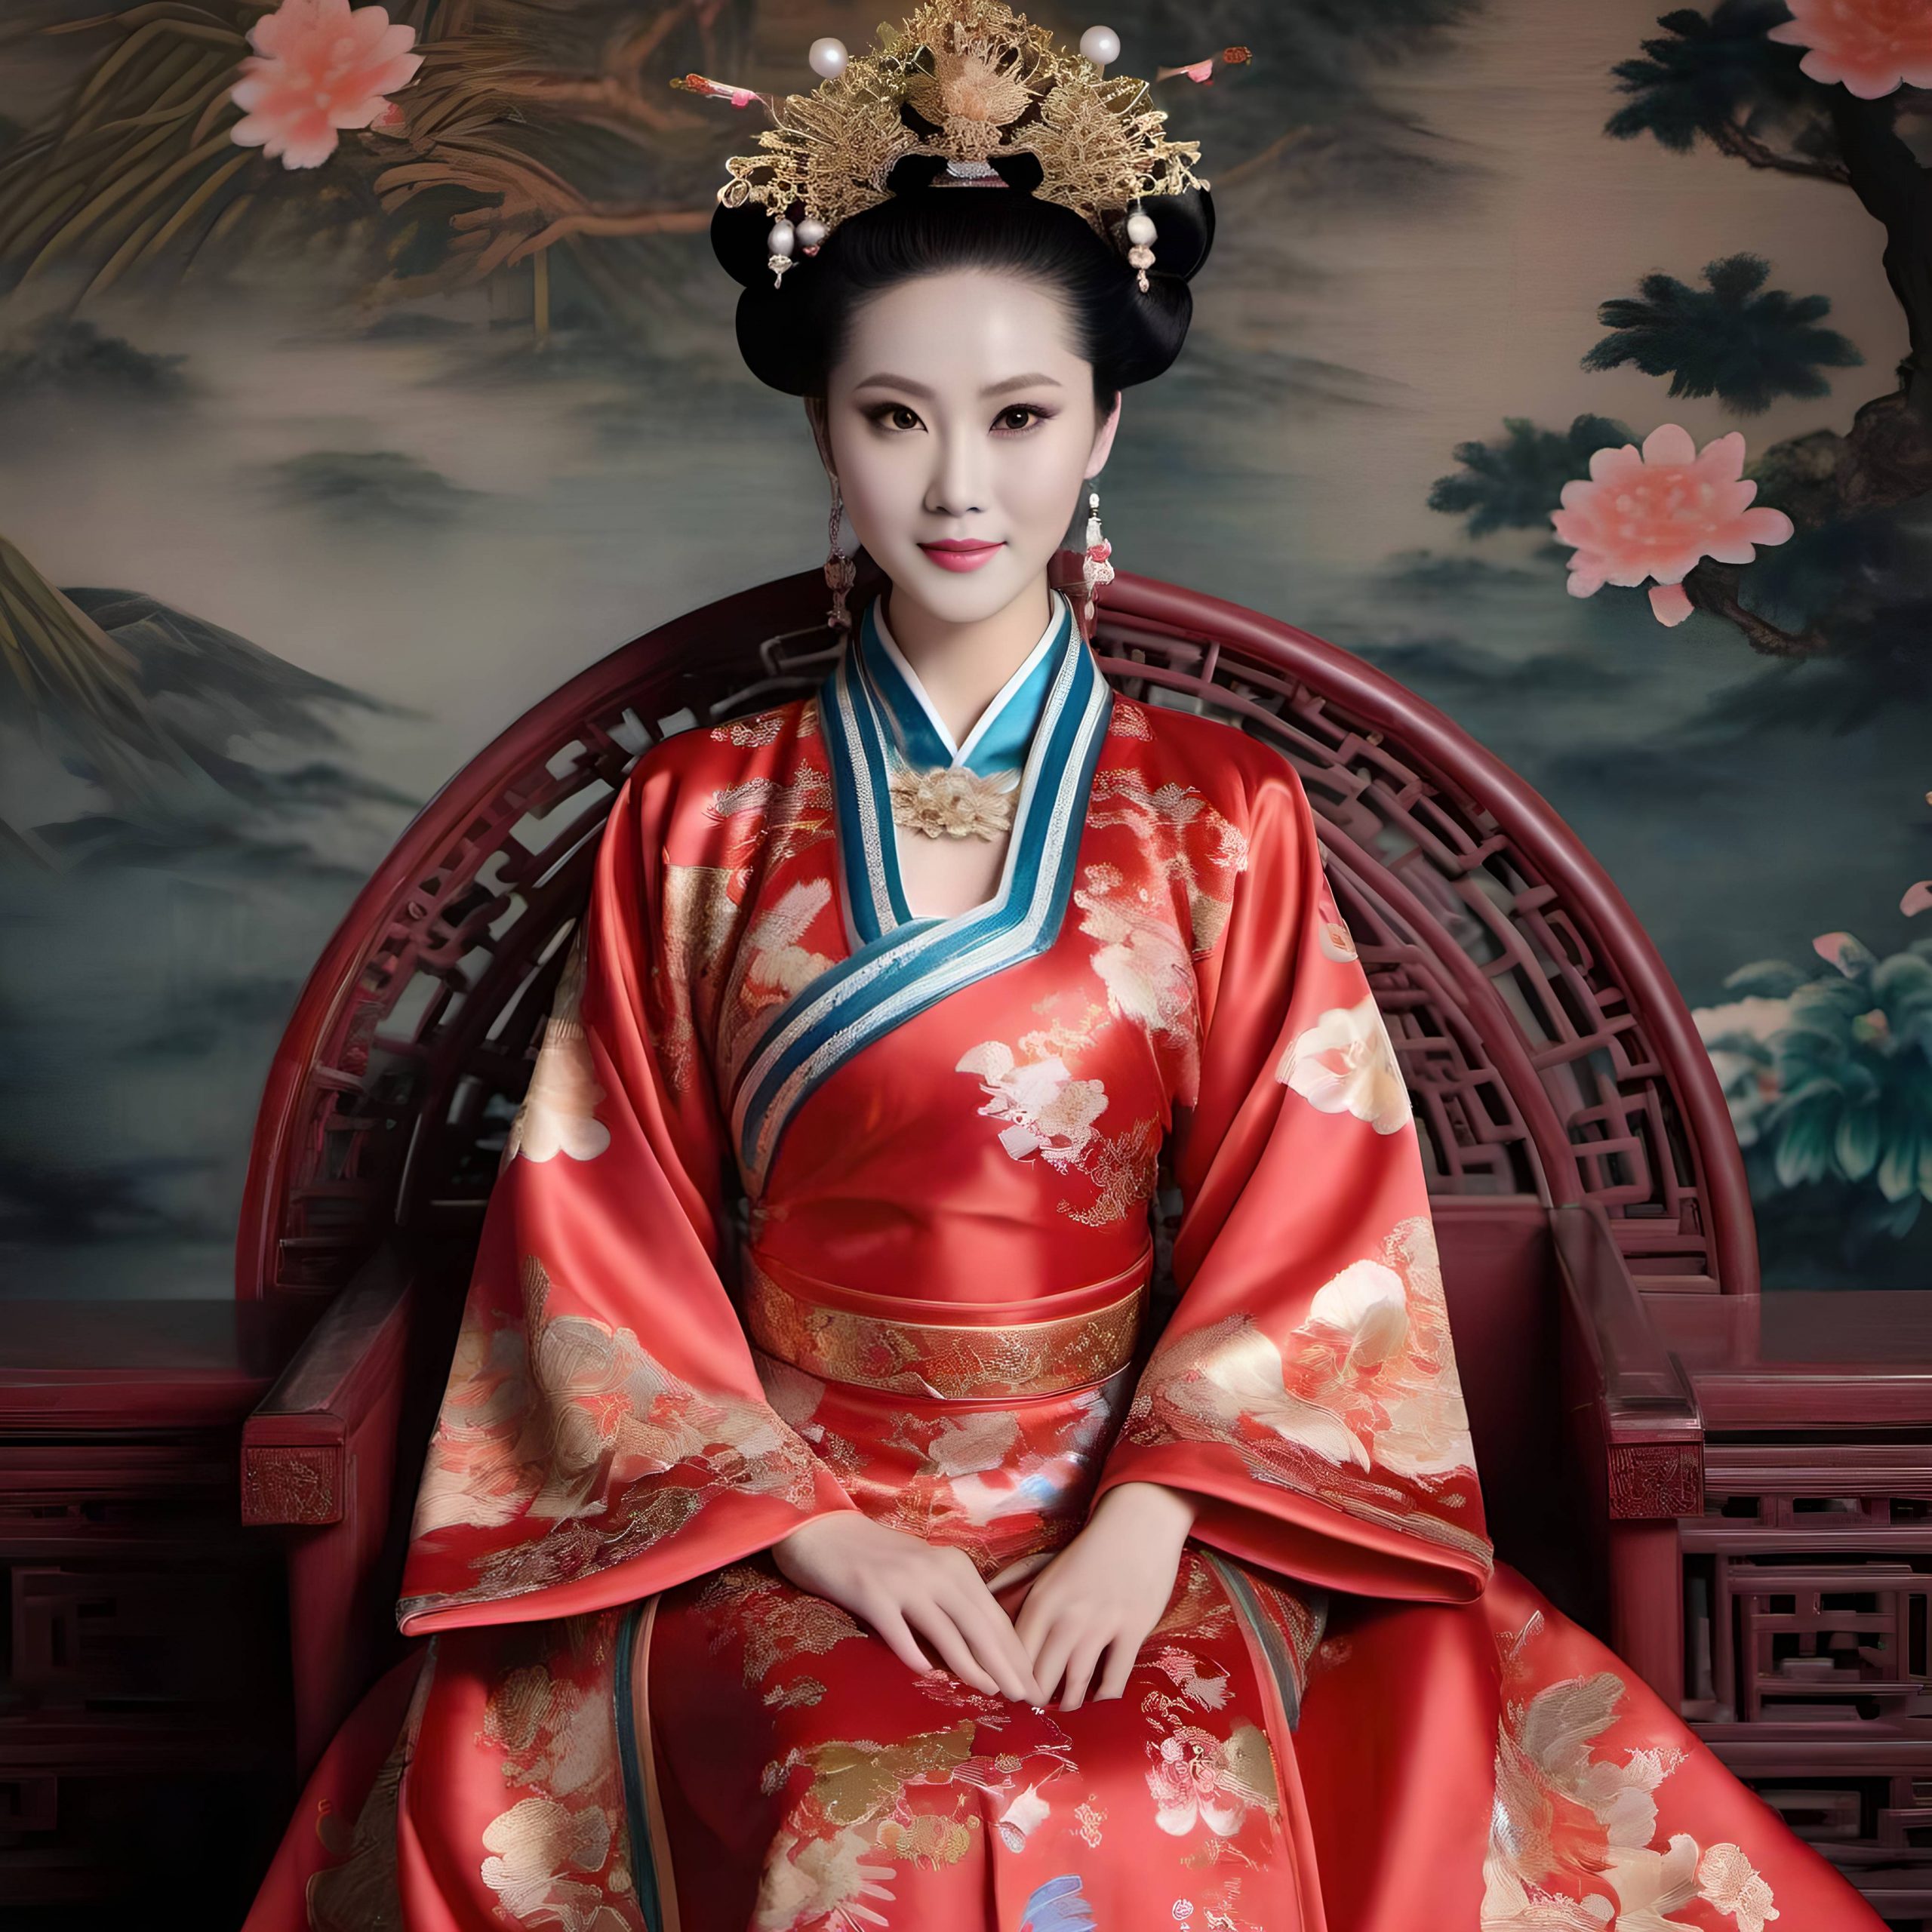 Armchair Interviews: Unveiling the Mysteries of Empress Wu Zetian